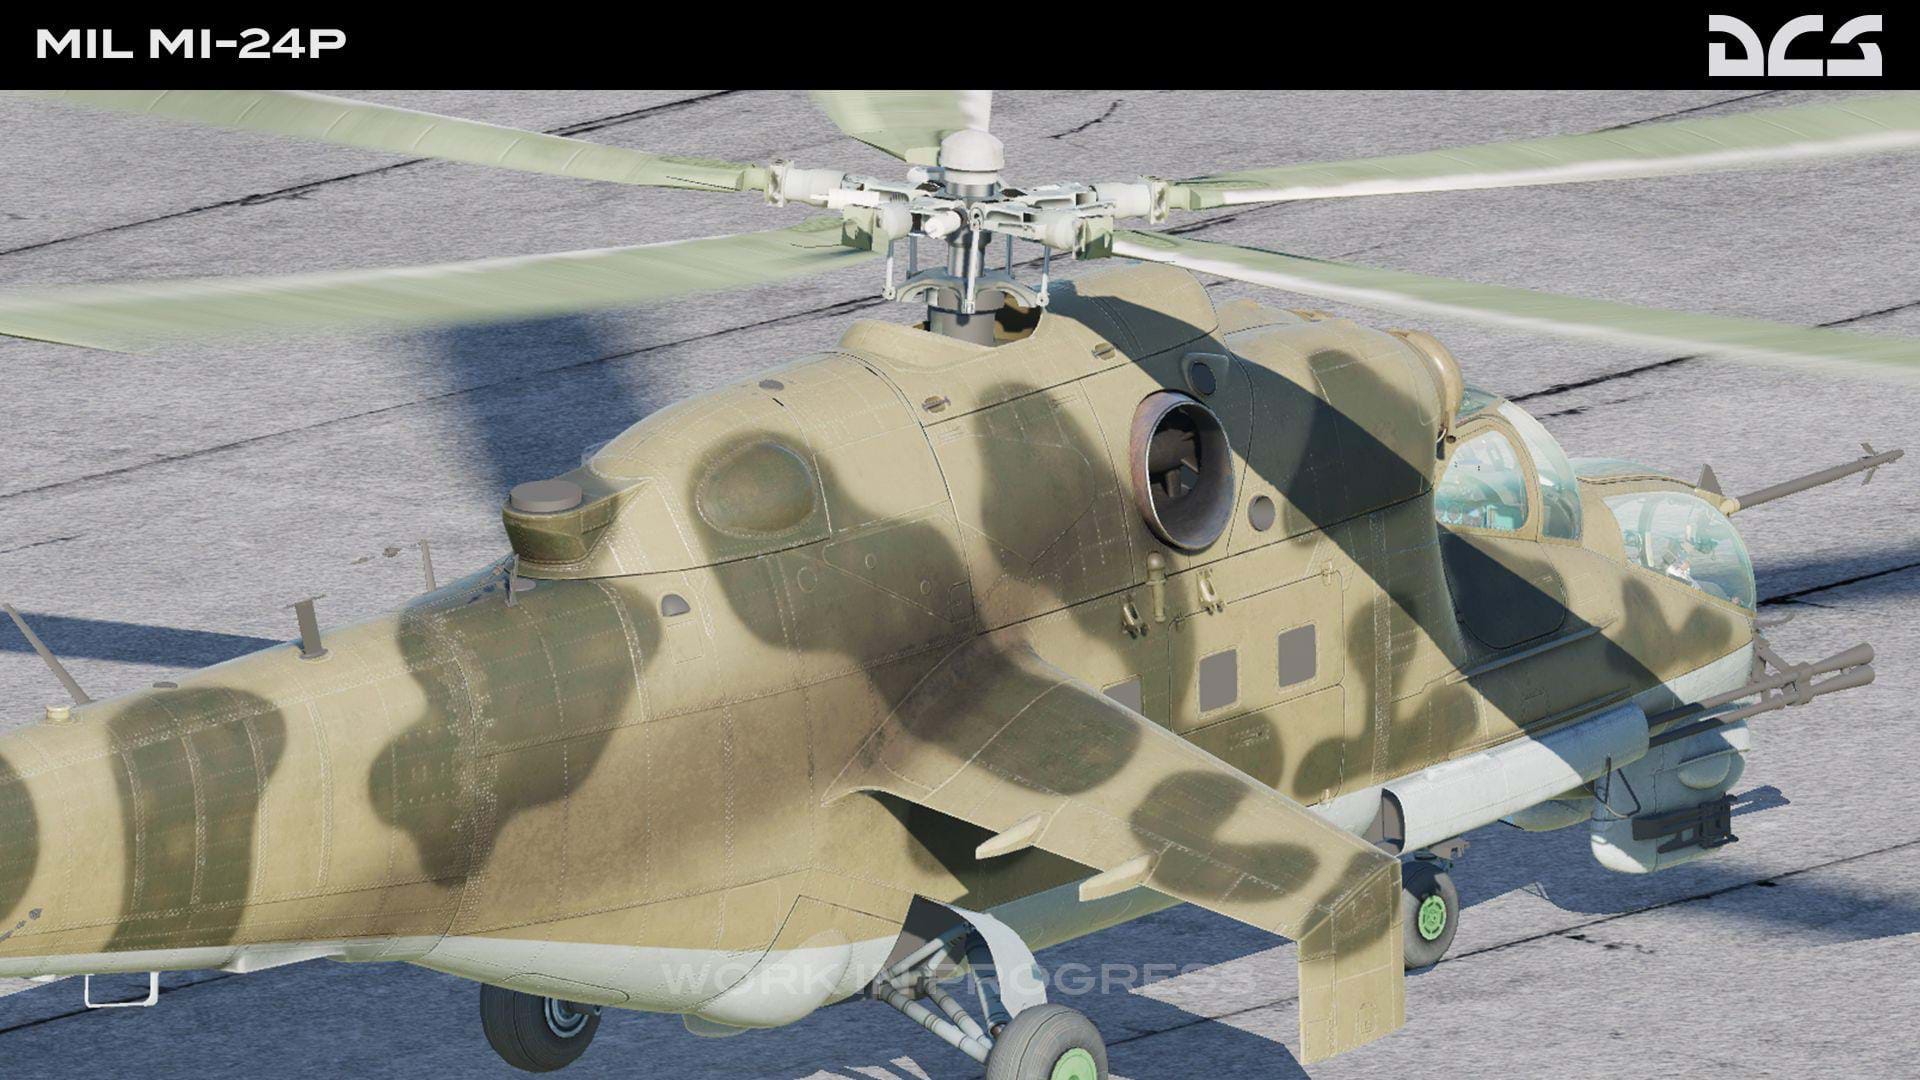 Mi-24 Hind for DCS